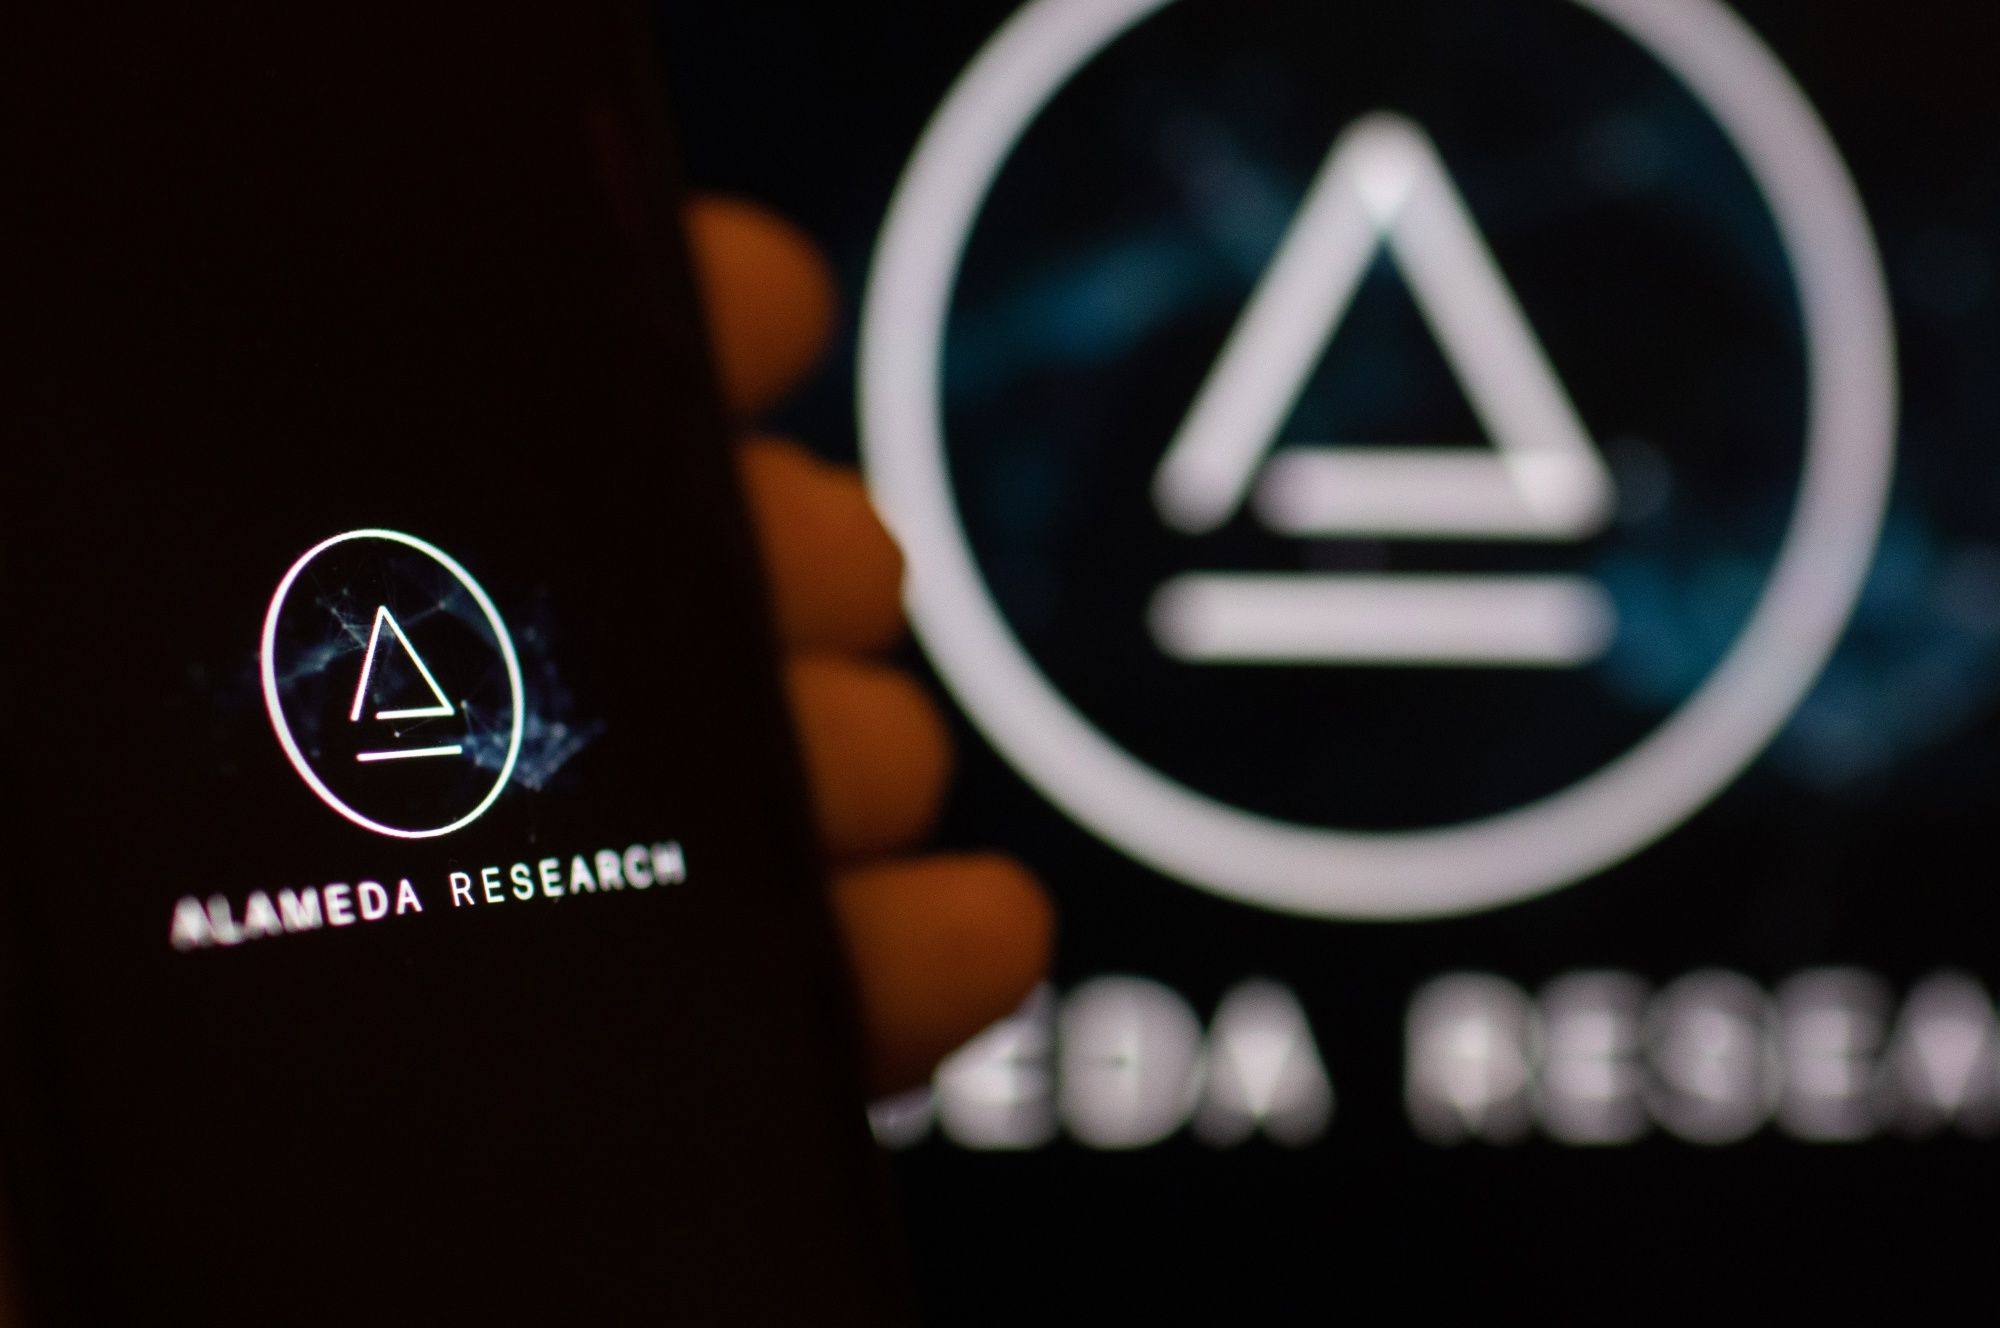 The logo of Alameda Research LLC on digital devices arranged in Riga, Latvia, on November 22, 2022. Photo: Bloomberg